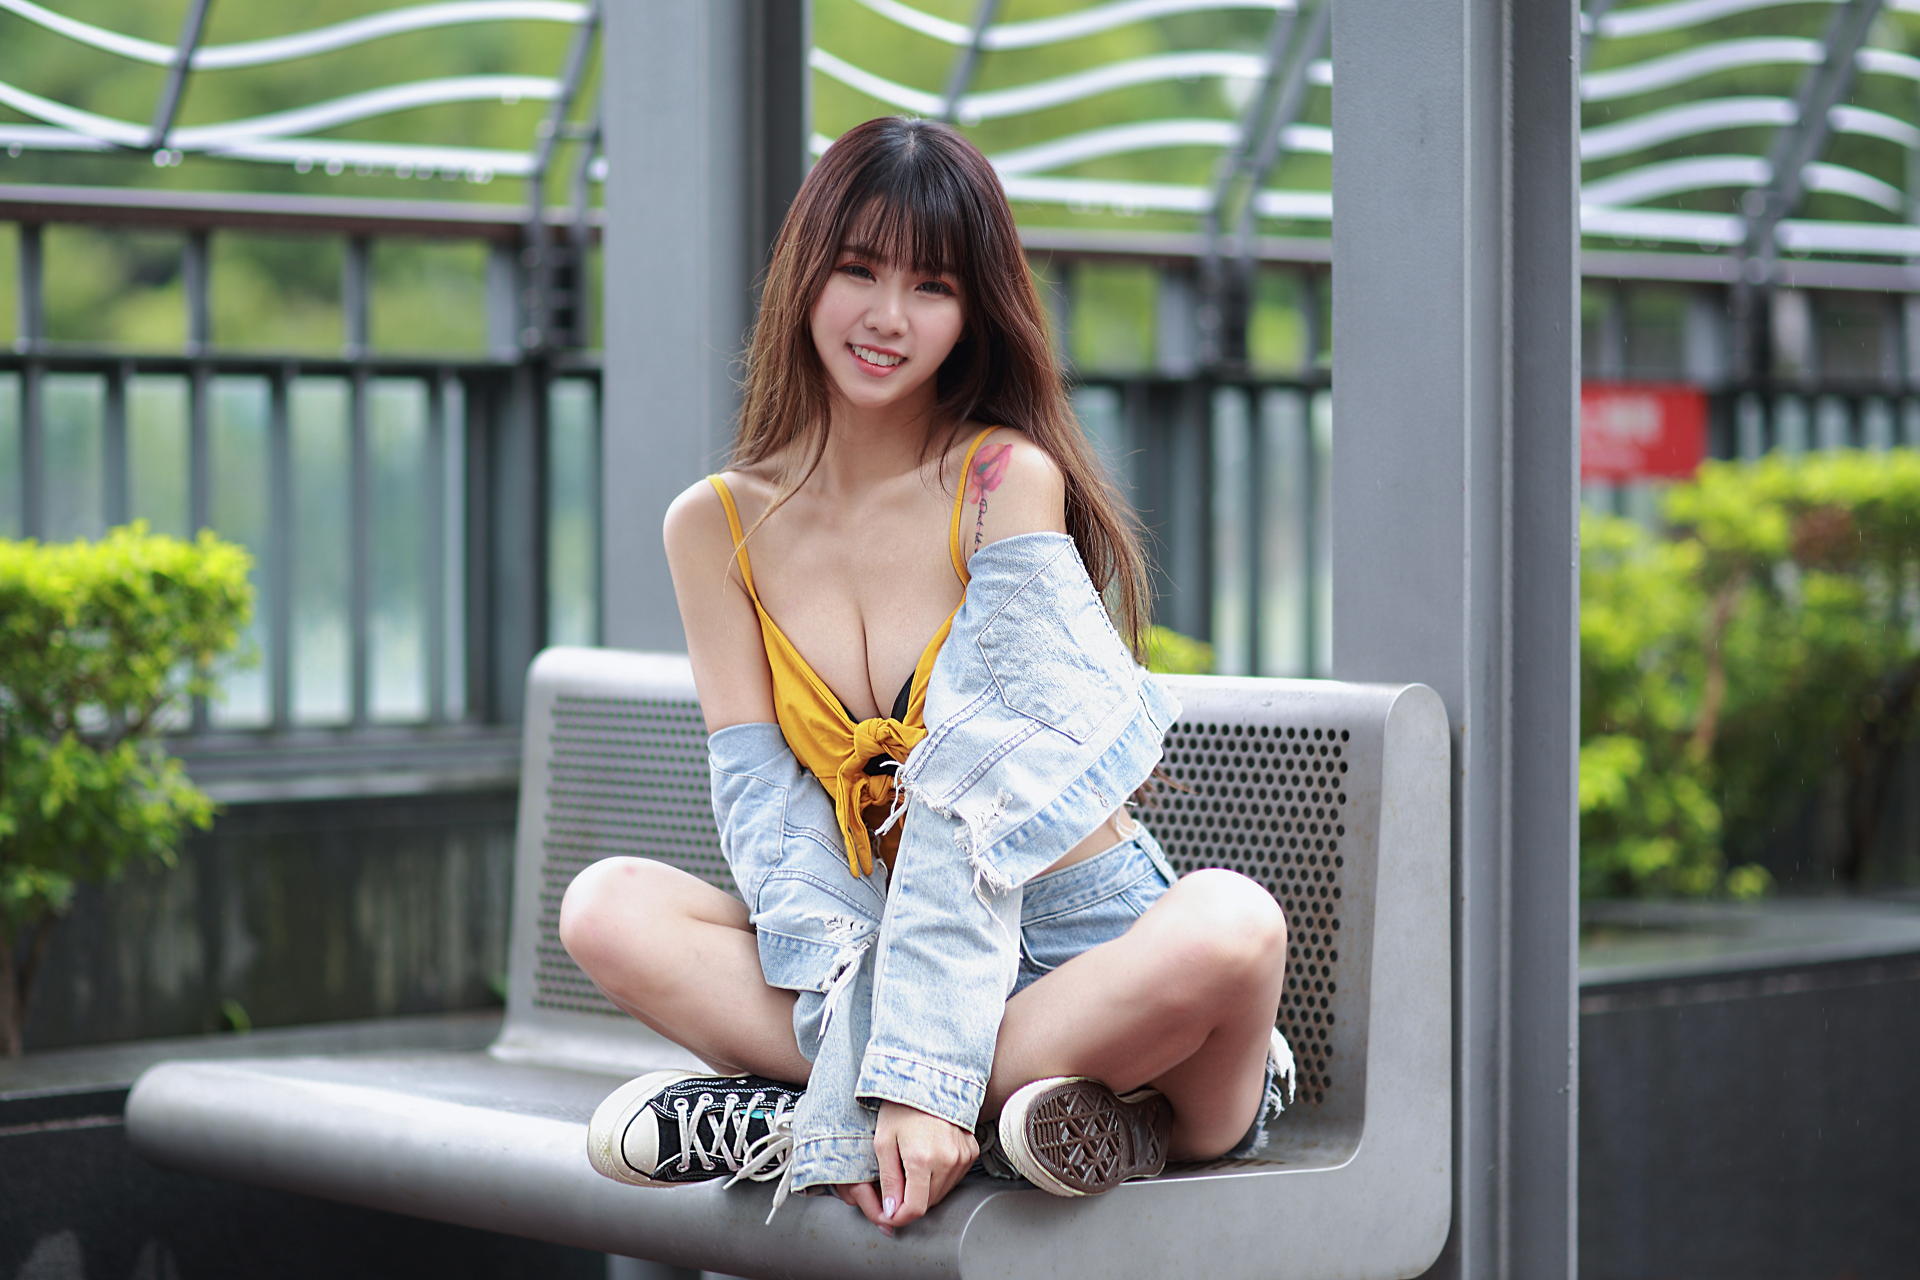 People 1920x1280 Asian model women long hair brunette sitting sneakers shorts yellow tops cleavage bench